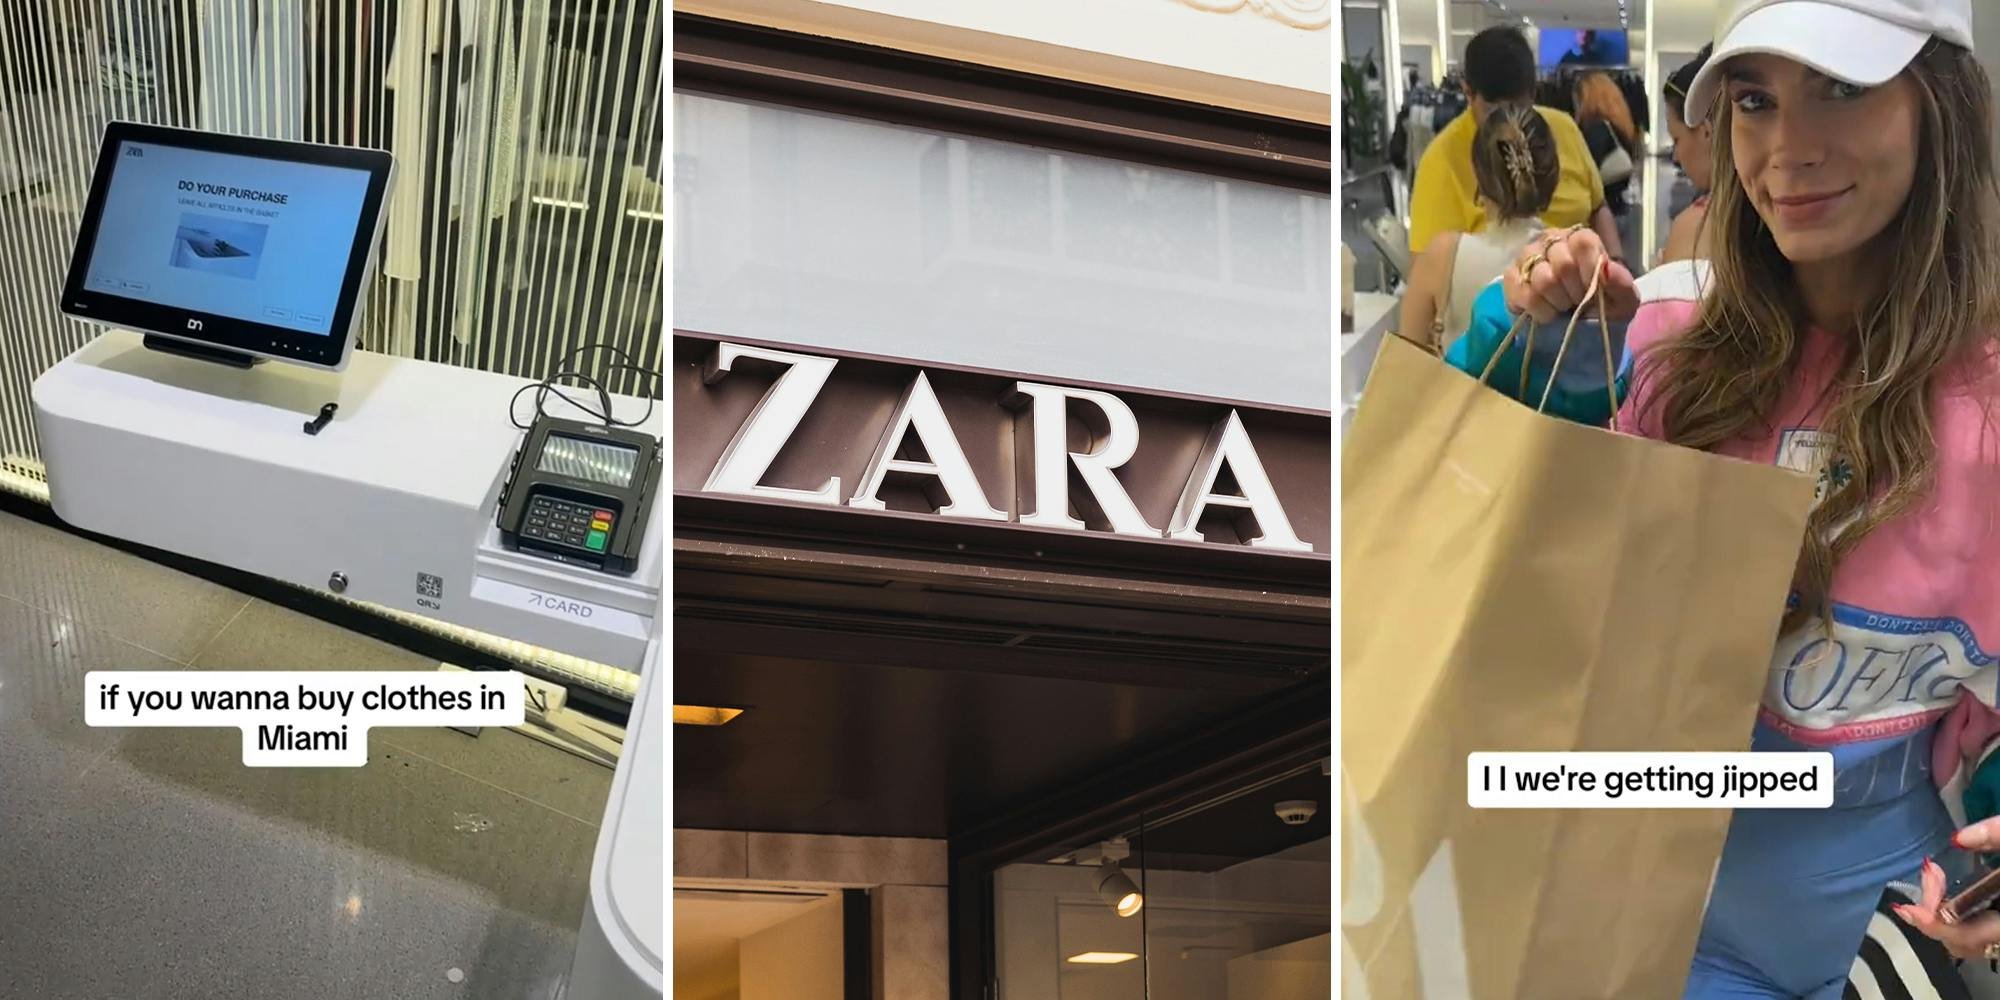 ‘I’m basically doing all the work that an employee should be doing’: Customer slams Zara’s self-checkout process after he had to take off magnetic strips, hangers himself